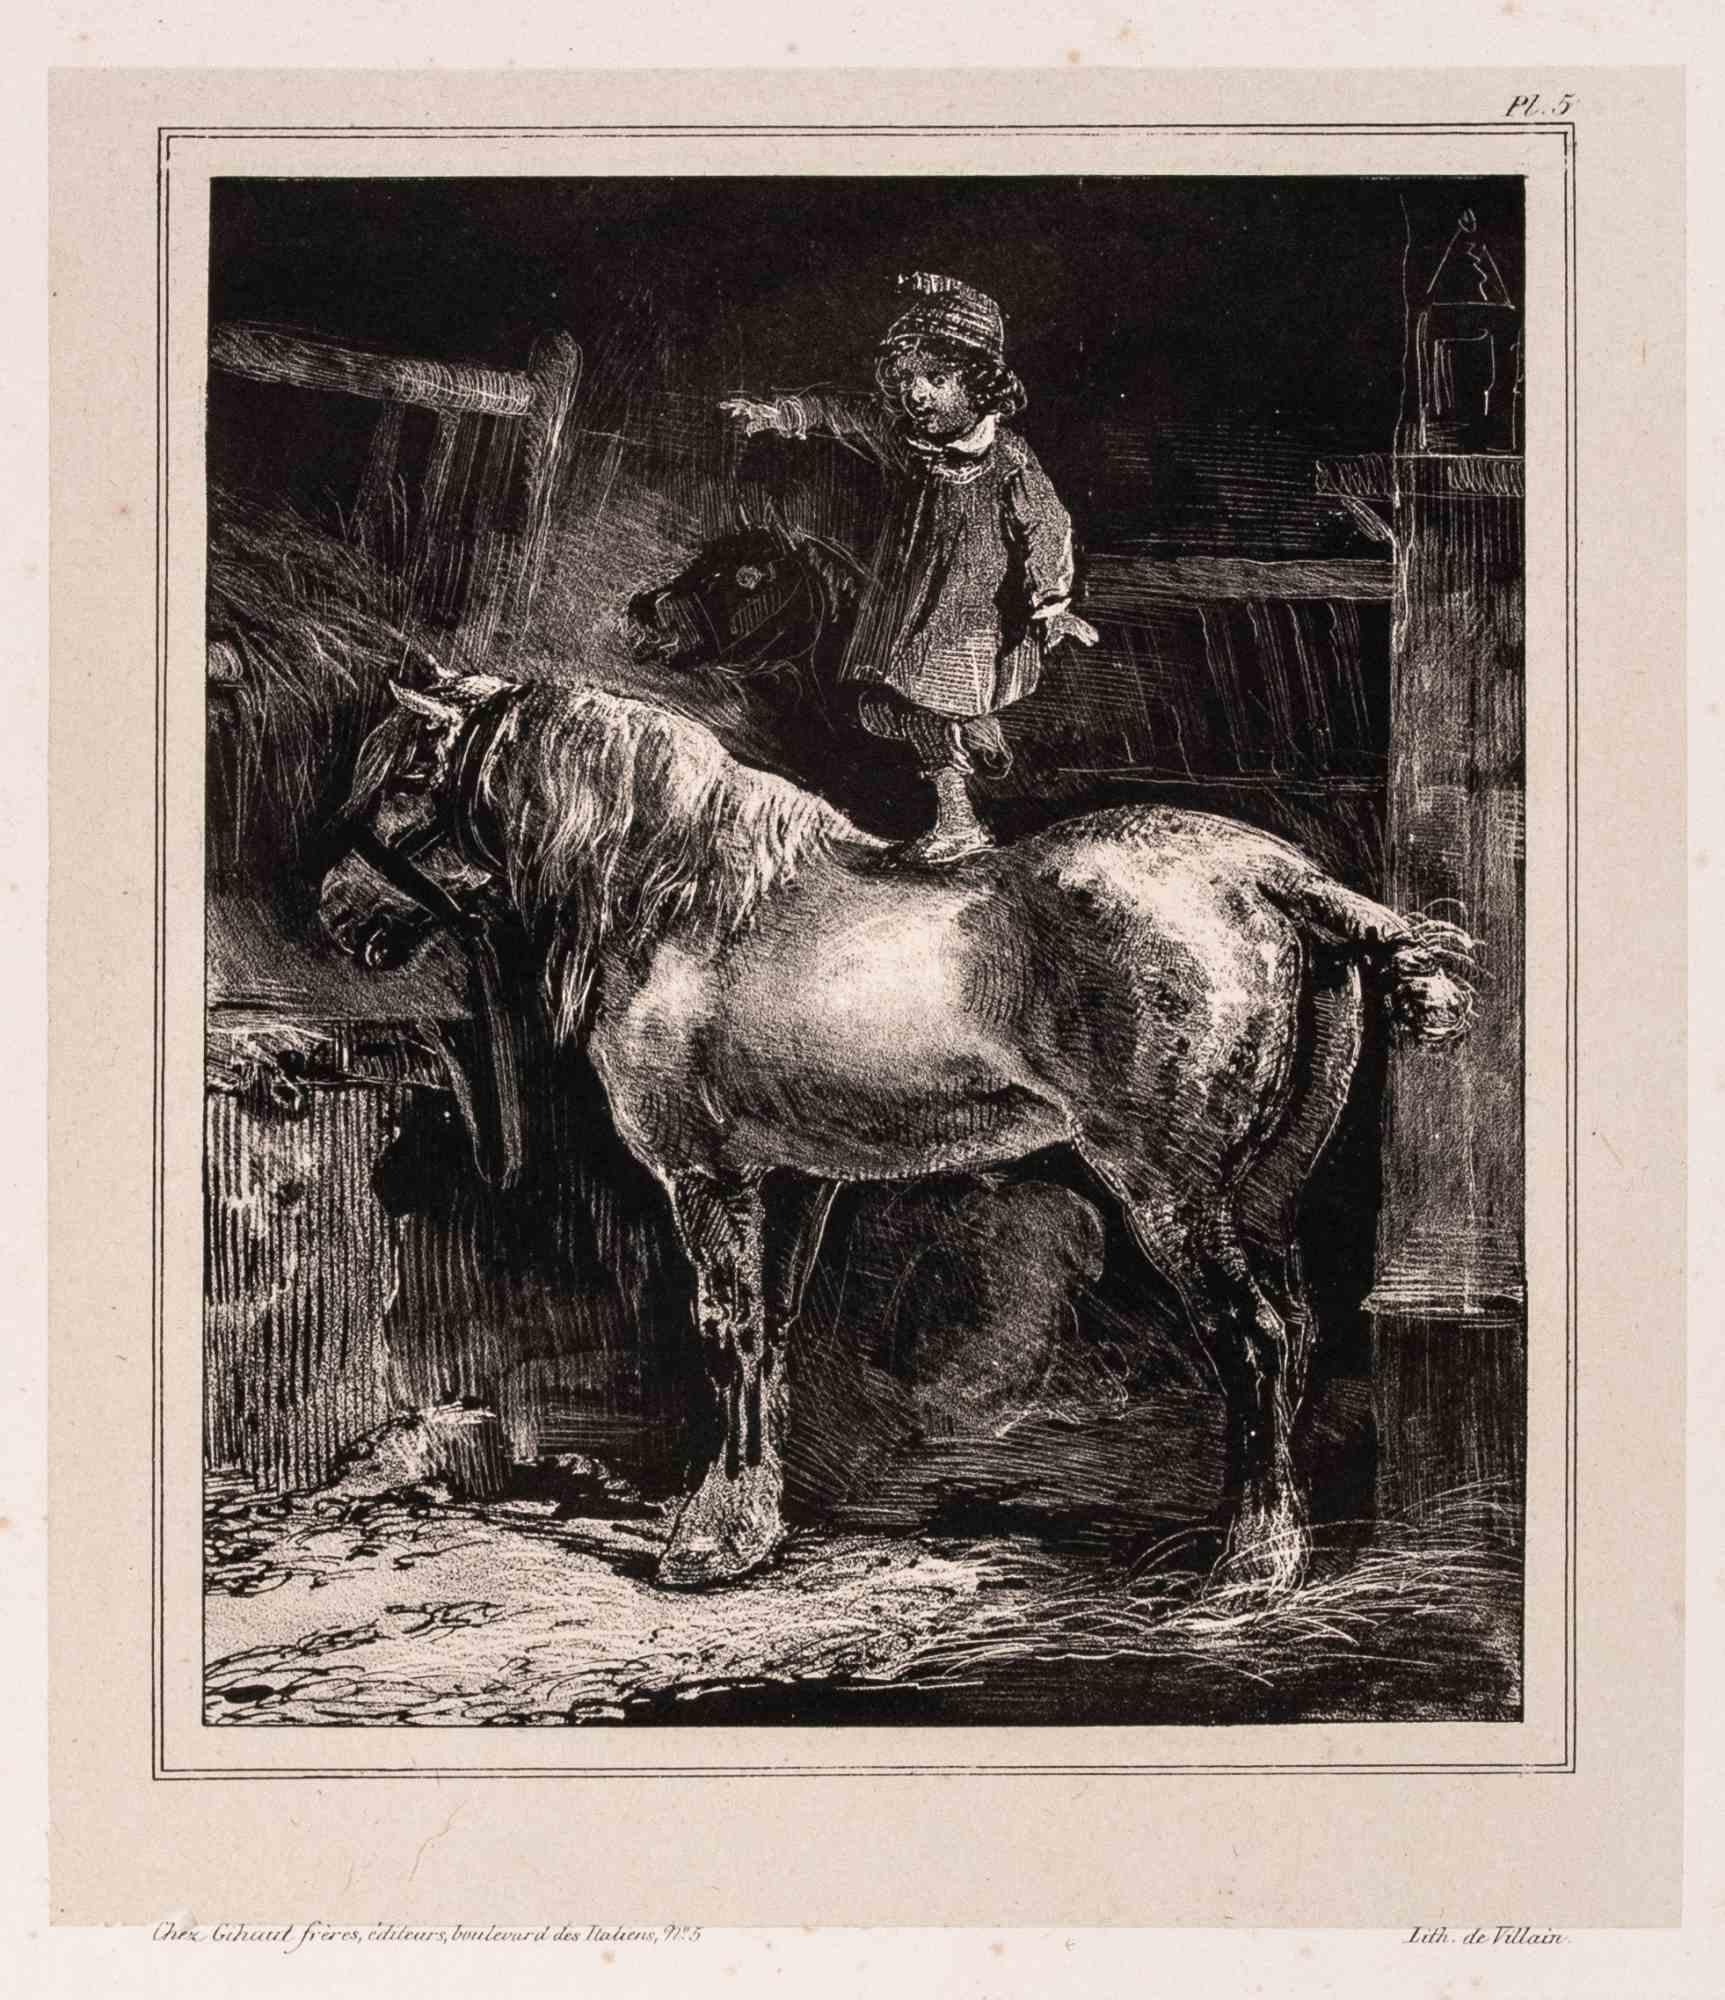 Nicolas Toussaint Charlet Figurative Print - The Child  - Original Lithograph by N. Toussaint Charlet - Early 19th Century